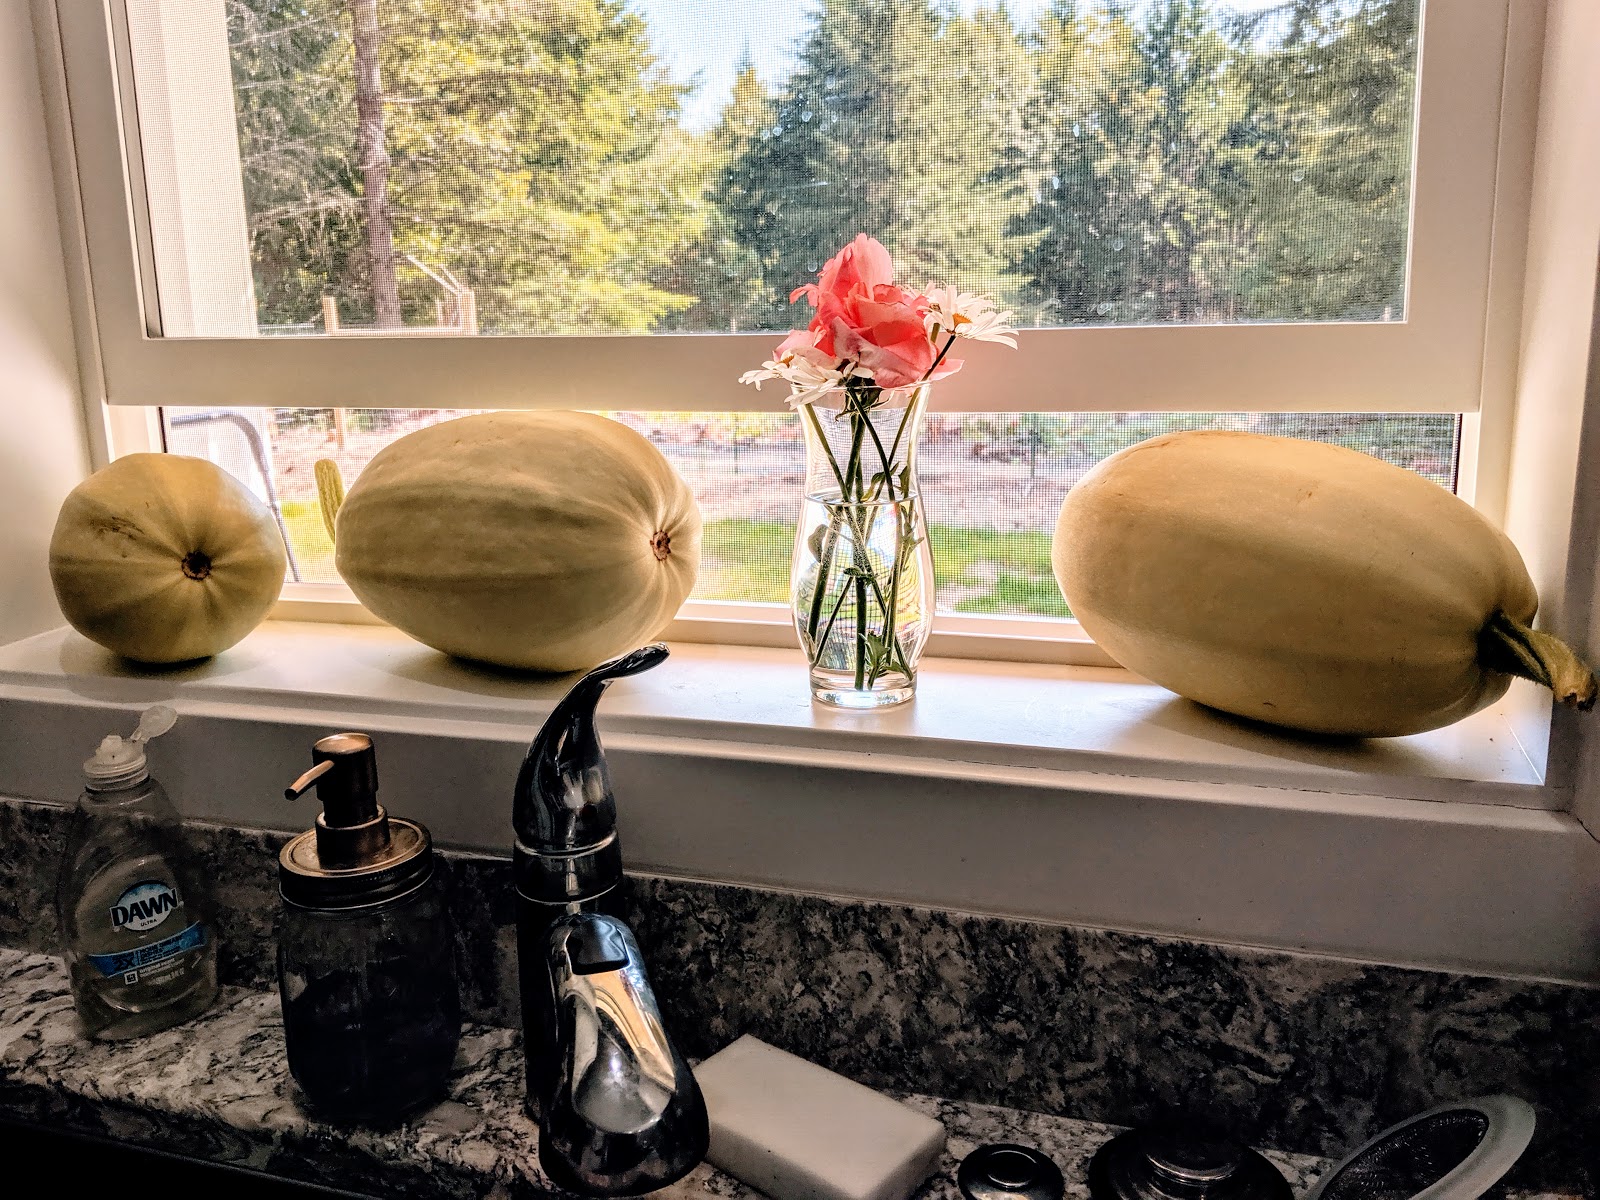 Squash ripening in the window sill